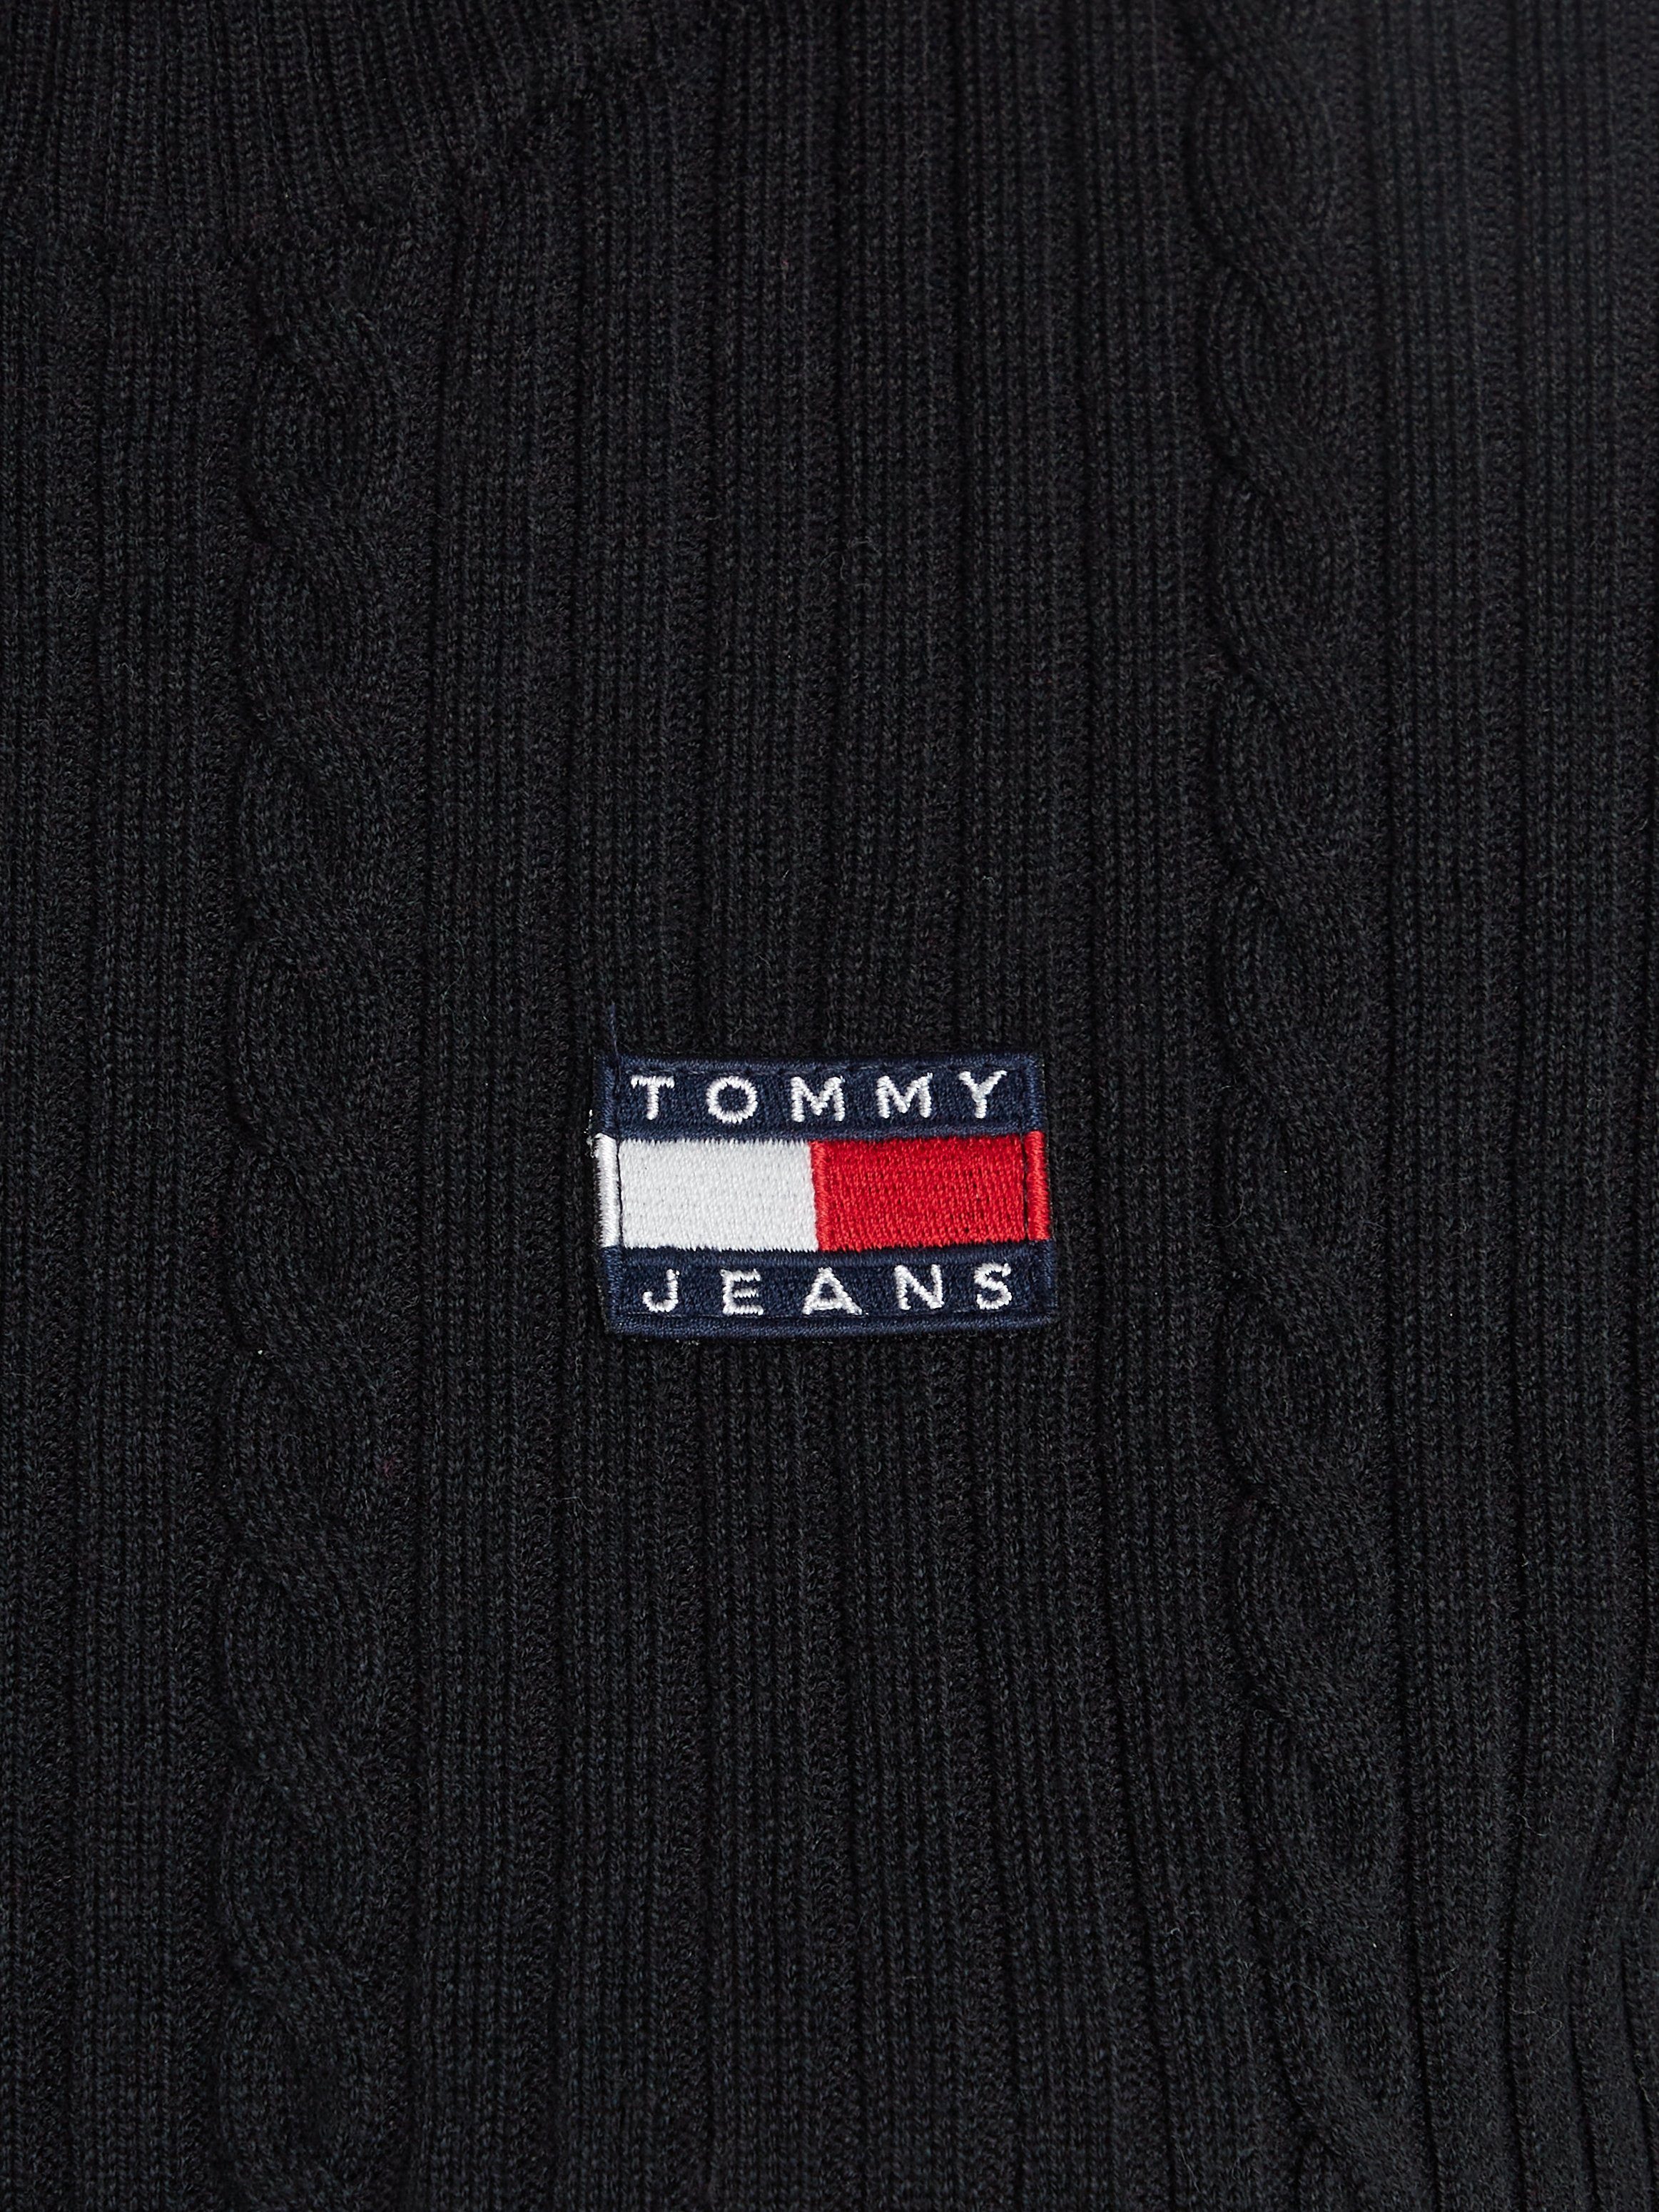 SWEATER CABLE ZIP THRU Cardigan BADGE Black Jeans Tommy TJW